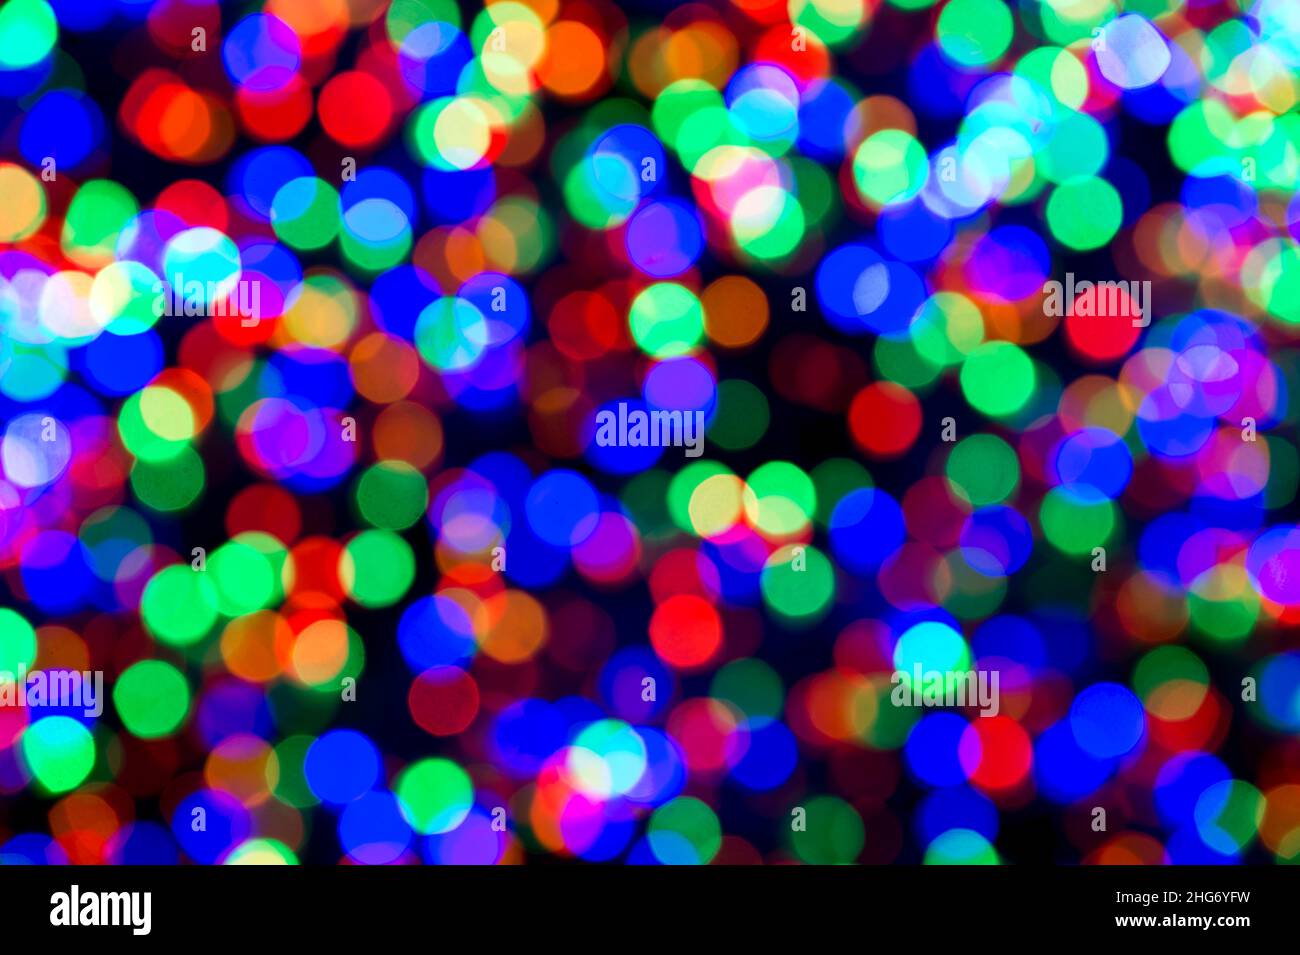 Christmas lights abstract pattern Stock Photo